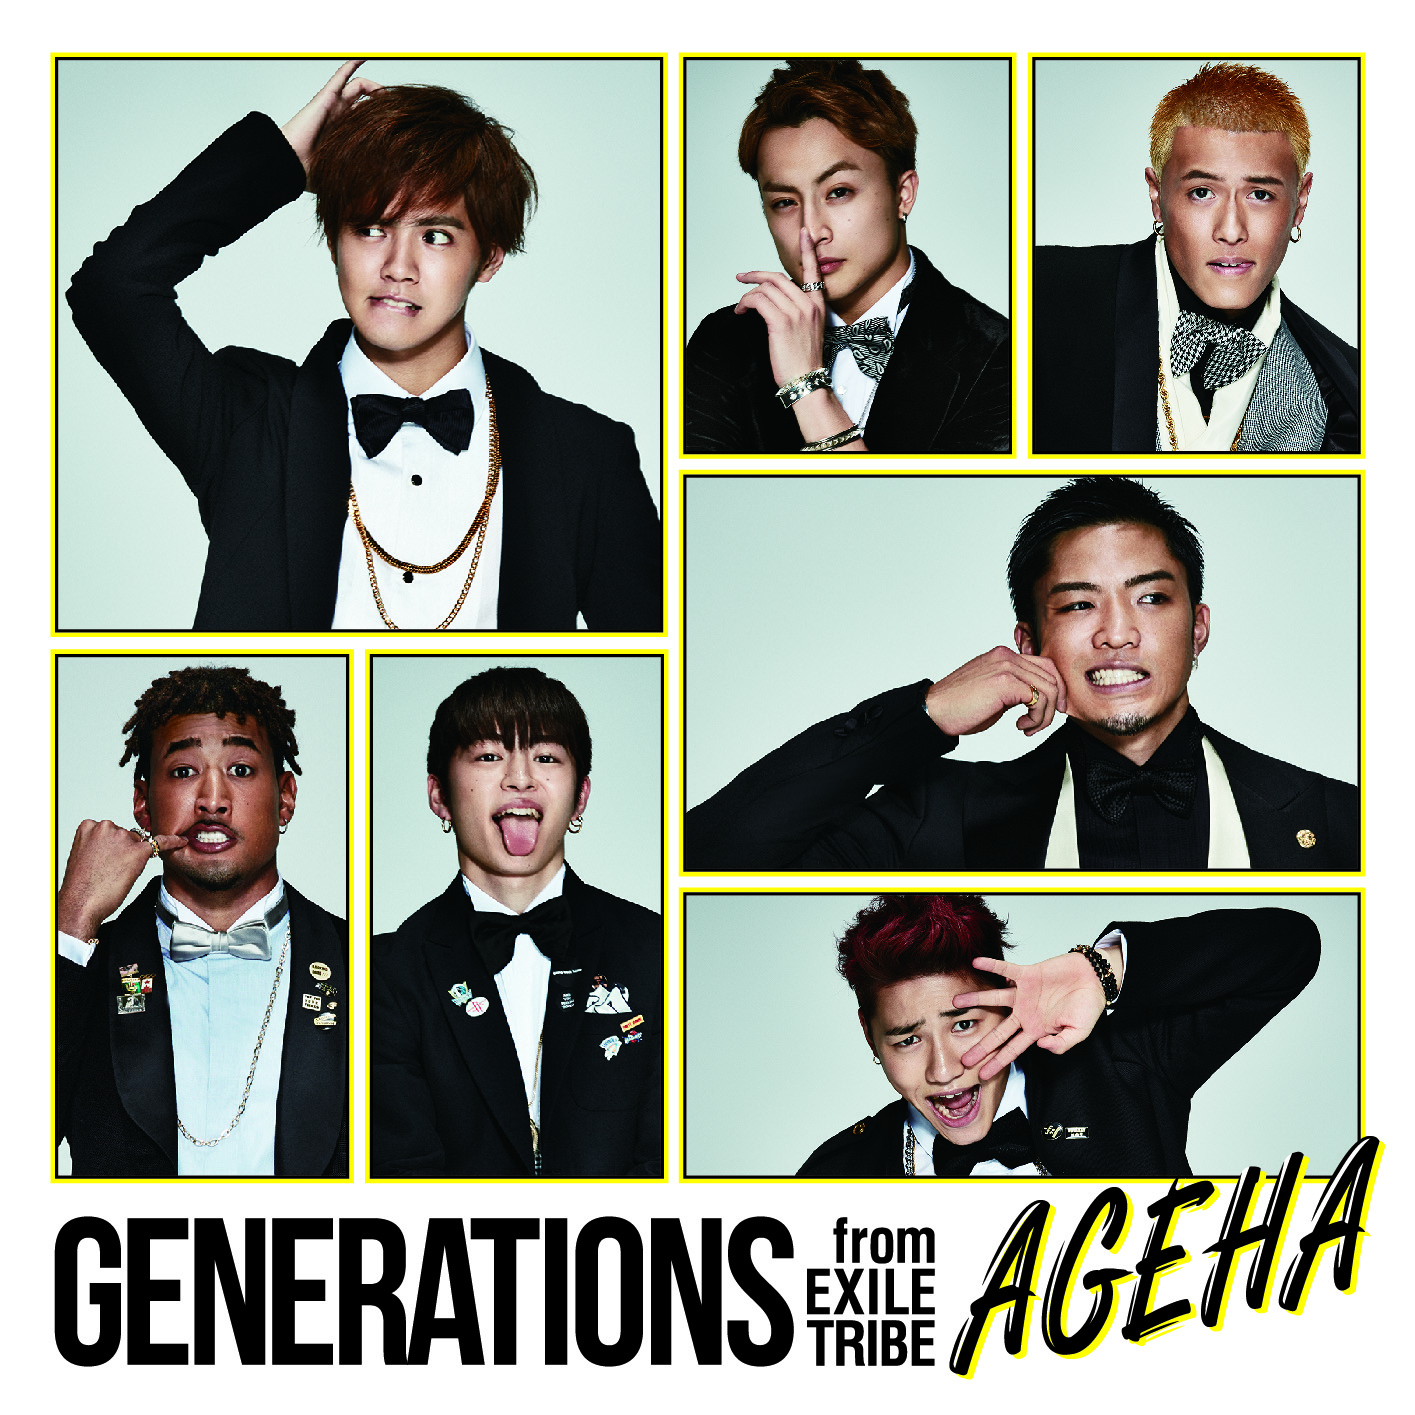 generations from exile tribe reo